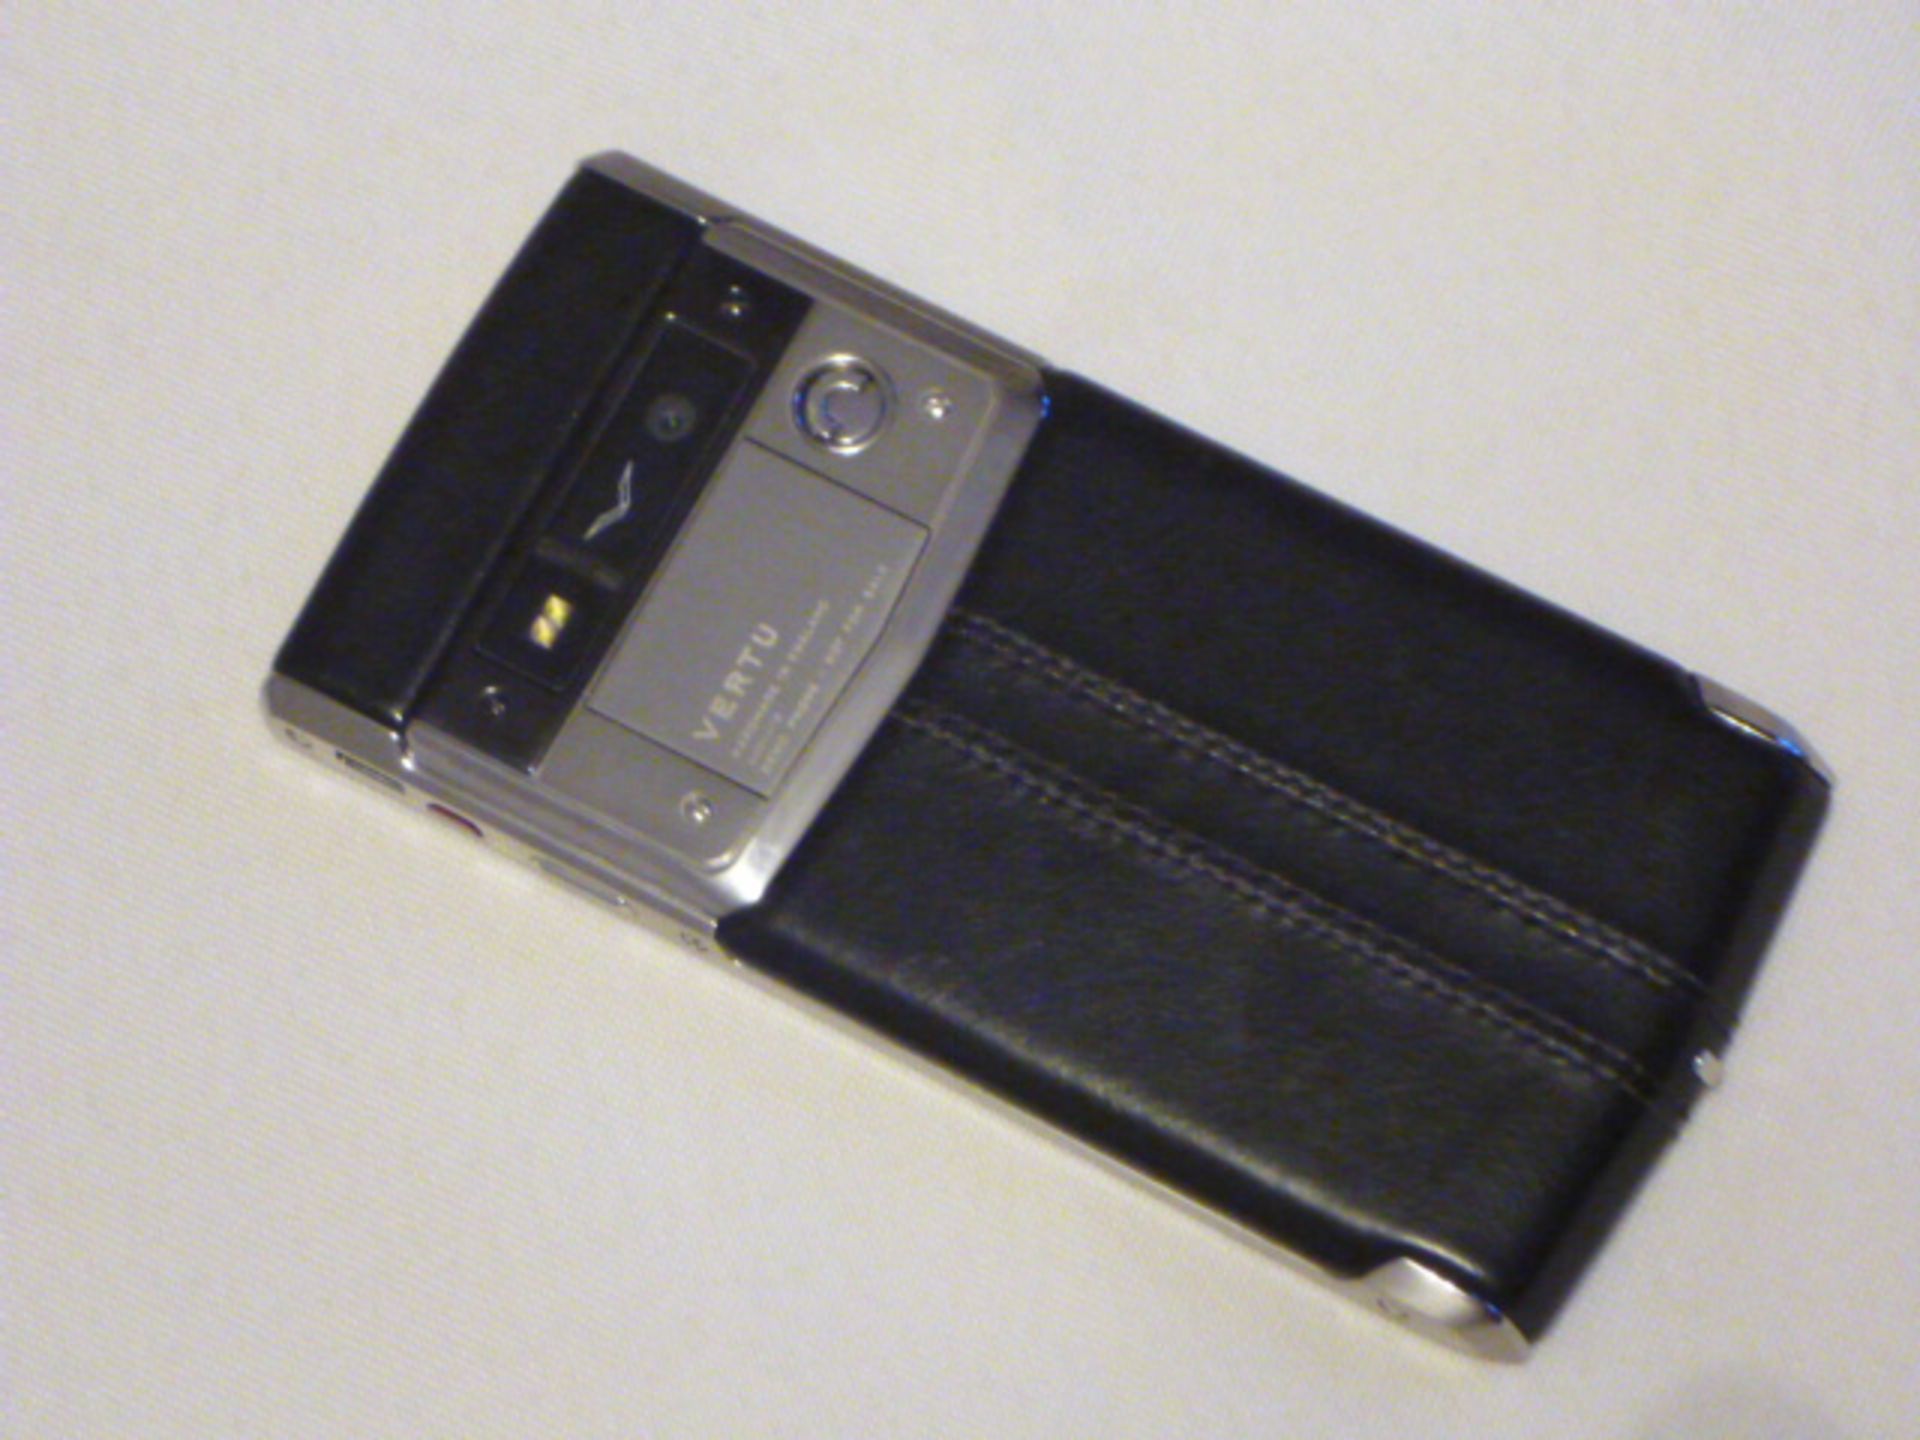 Vertu Signature Touch, Jet Calf. Demonstrator, S/N E-001276 Tested Working, but without Warranty - Bild 2 aus 2